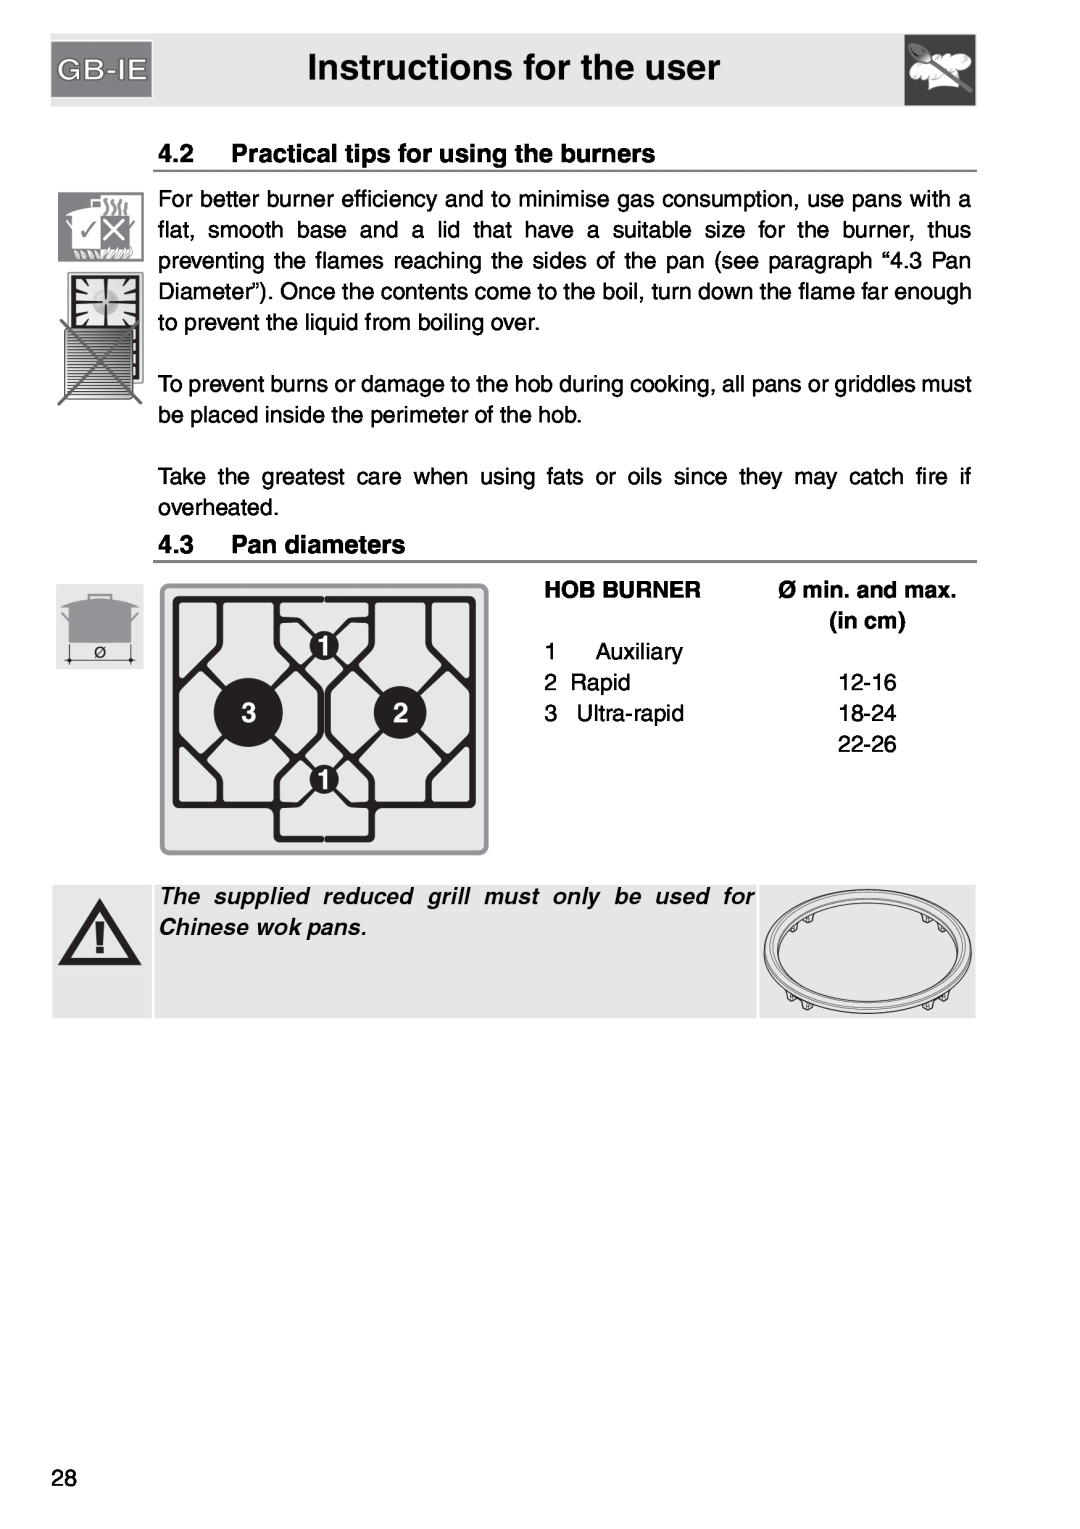 Smeg gas cooktop Instructions for the user, 4.2Practical tips for using the burners, 4.3Pan diameters, Hob Burner, in cm 